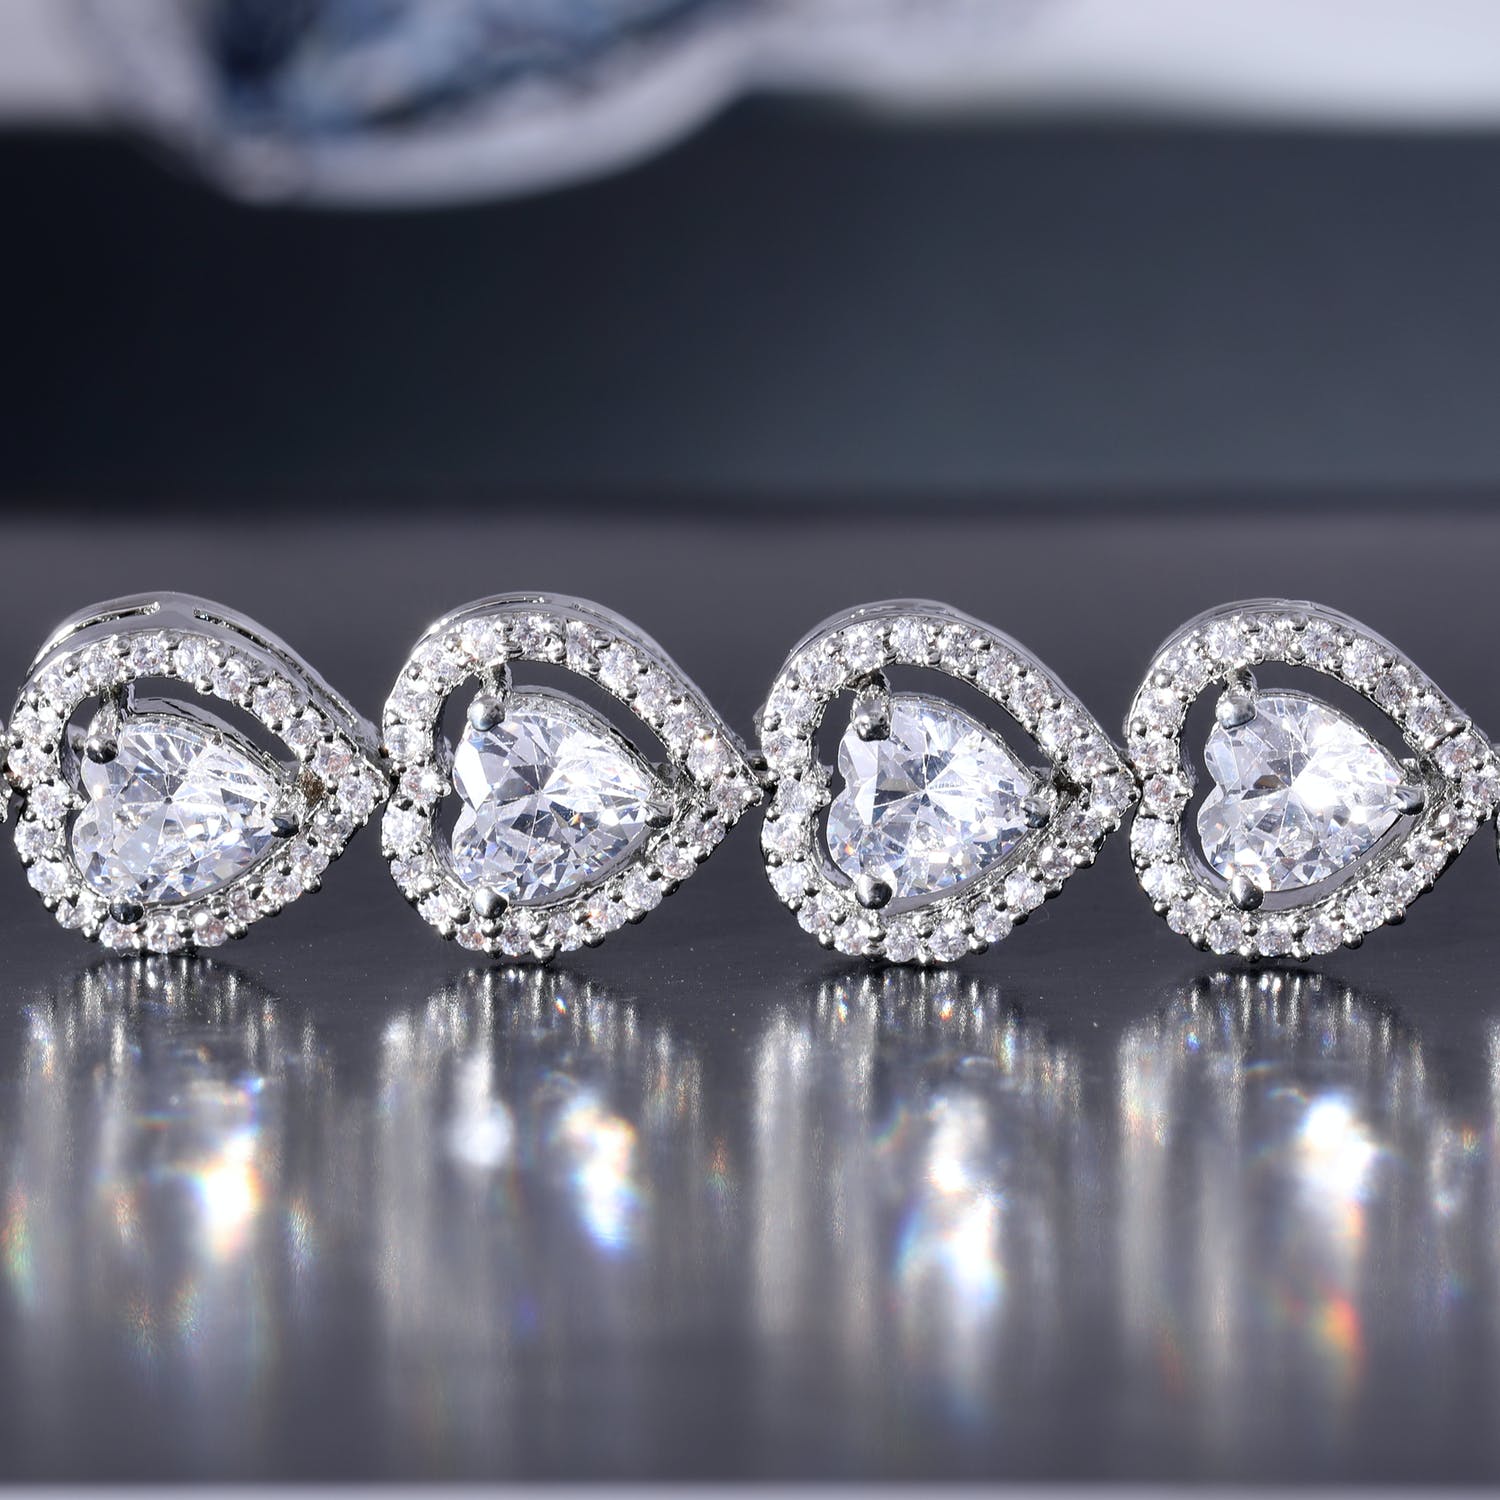 Why Is Buying Diamond Jewellery a Good Investment?